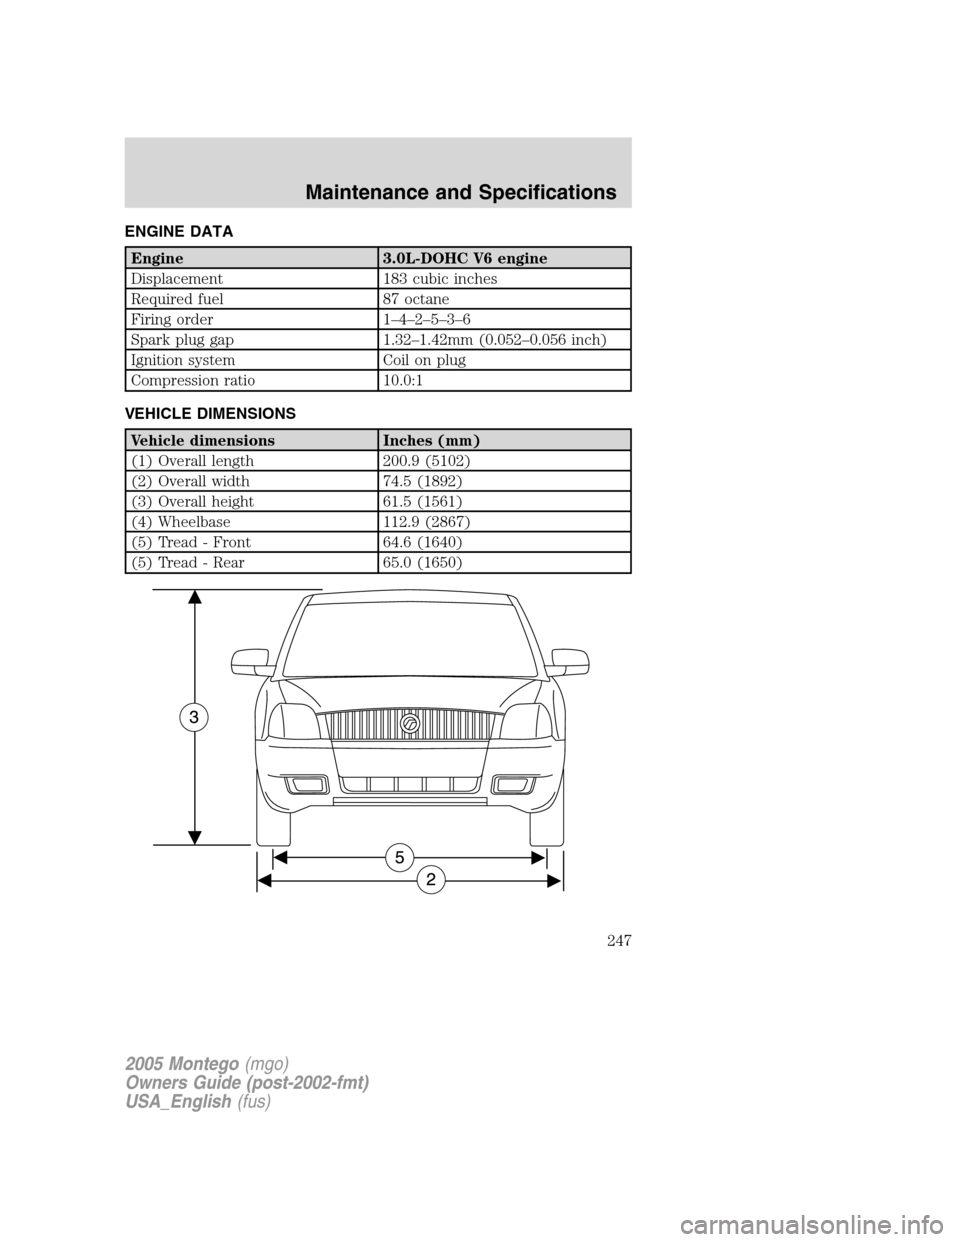 Mercury Montego 2005  Owners Manuals ENGINE DATA
Engine 3.0L-DOHC V6 engine
Displacement 183 cubic inches
Required fuel 87 octane
Firing order 1–4–2–5–3–6
Spark plug gap 1.32–1.42mm (0.052–0.056 inch)
Ignition system Coil o